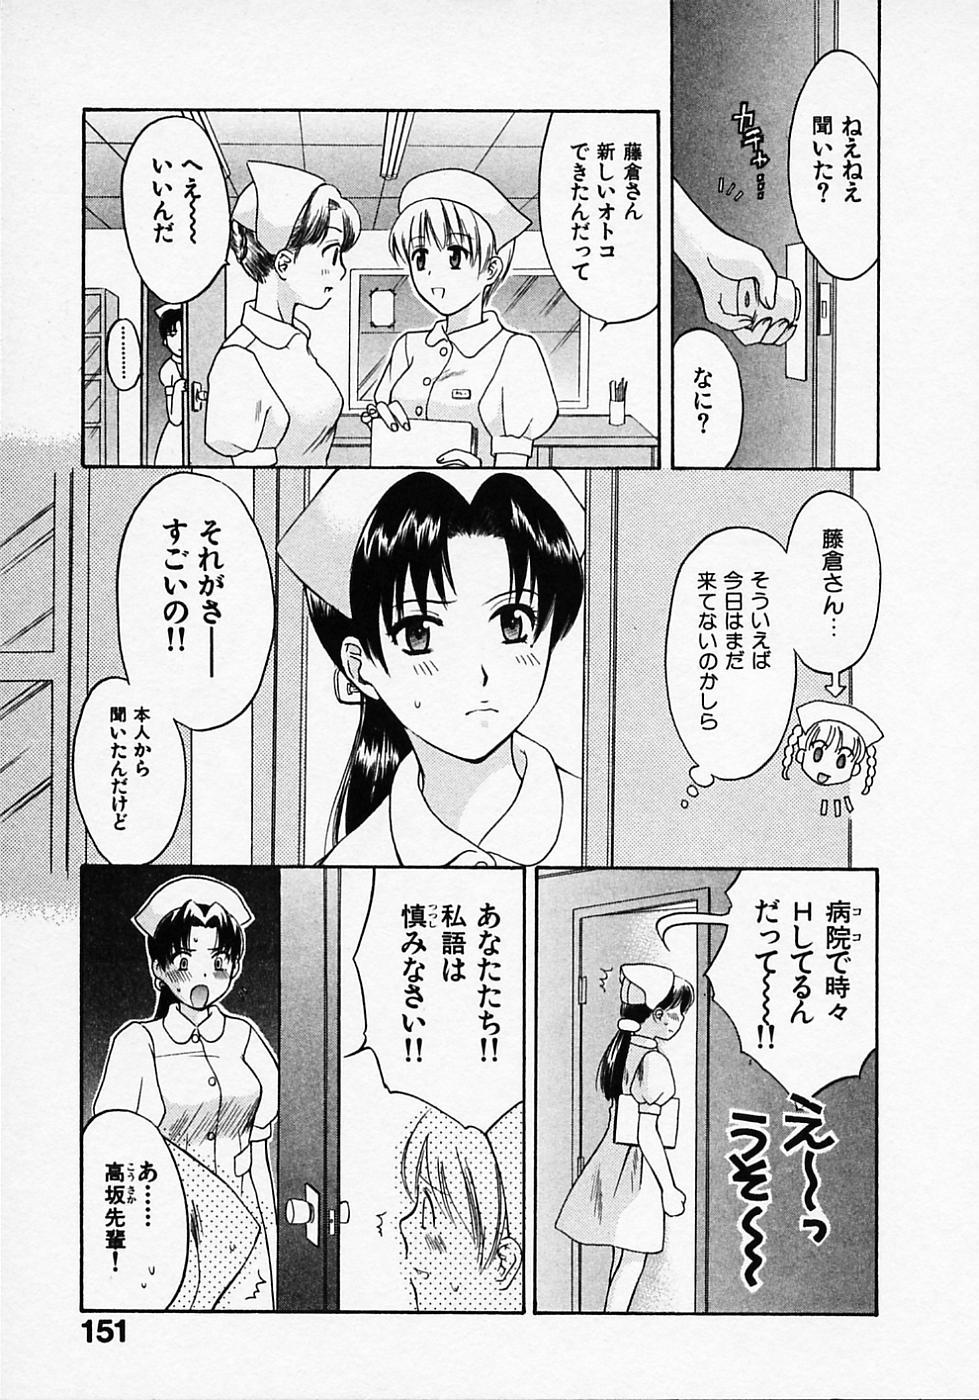 Maid In Japan 154